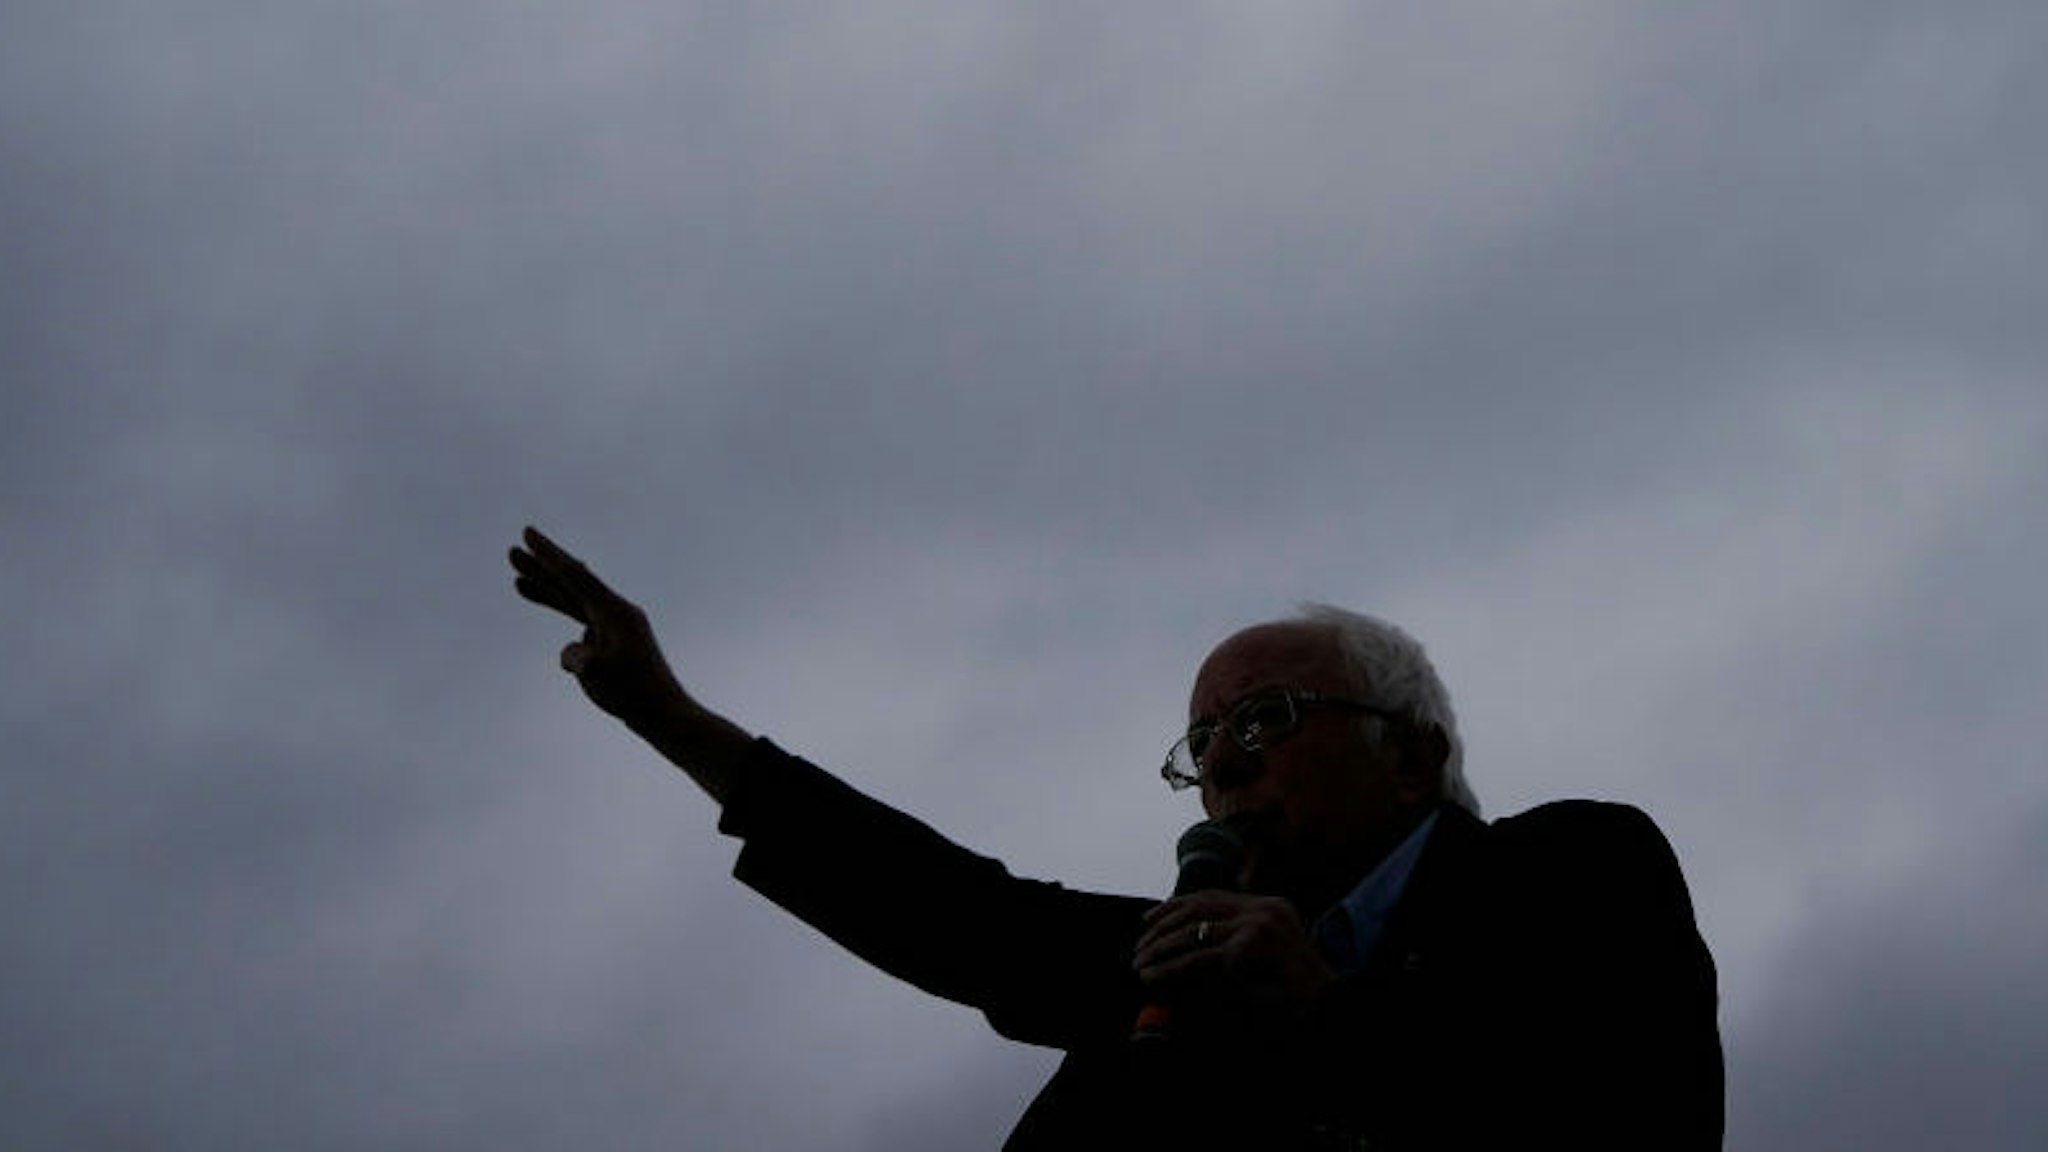 Democratic presidential candidate Sen. Bernie Sanders (I-VT) speaks during a campaign rally at Vic Mathias Shores Park on February 23, 2020 in Austin, Texas. With early voting underway in Texas, Sanders is holding four rallies in the delegate-rich state this weekend before traveling on to South Carolina. Texas holds their primary on Super Tuesday March 3rd, along with over a dozen other states. (Photo by Drew Angerer/Getty Images)